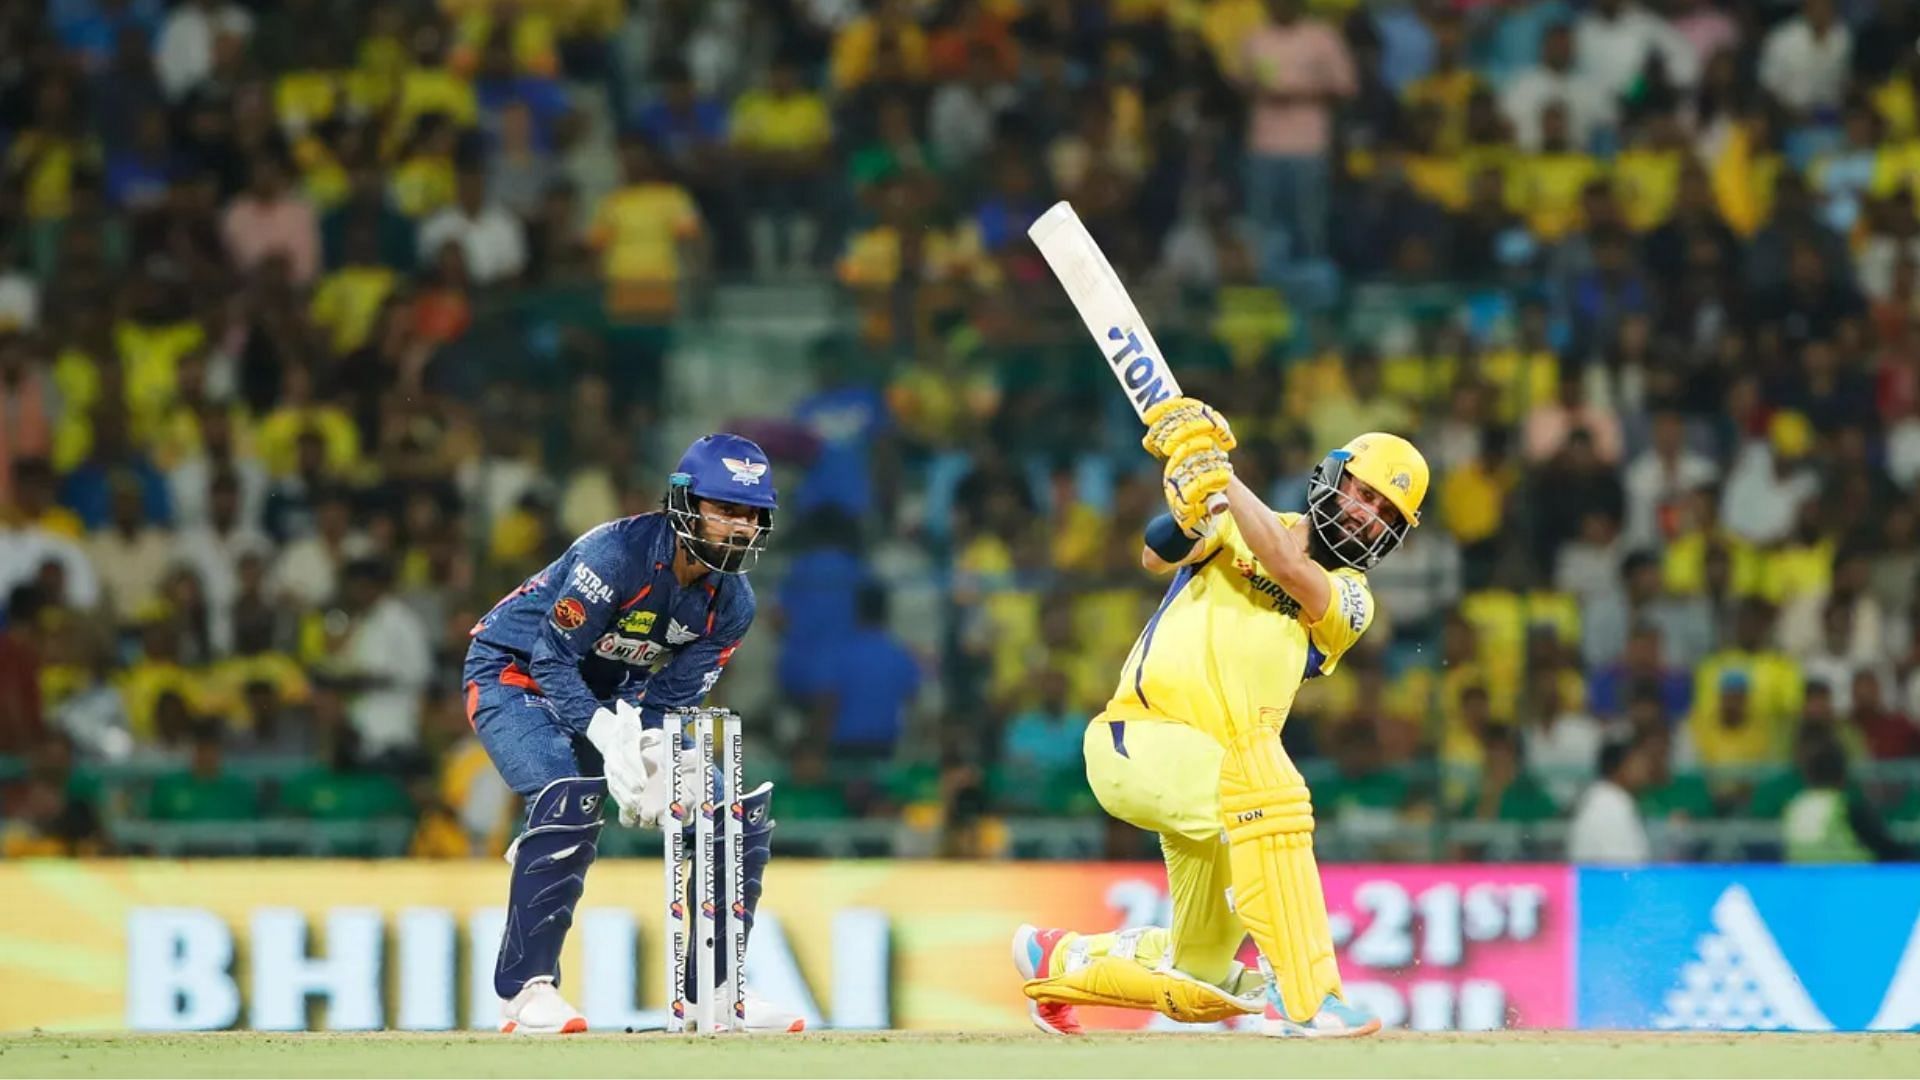 Moeen Ali was dismissed by Ravi Bishnoi, but not before some absolute carange by the southpaw